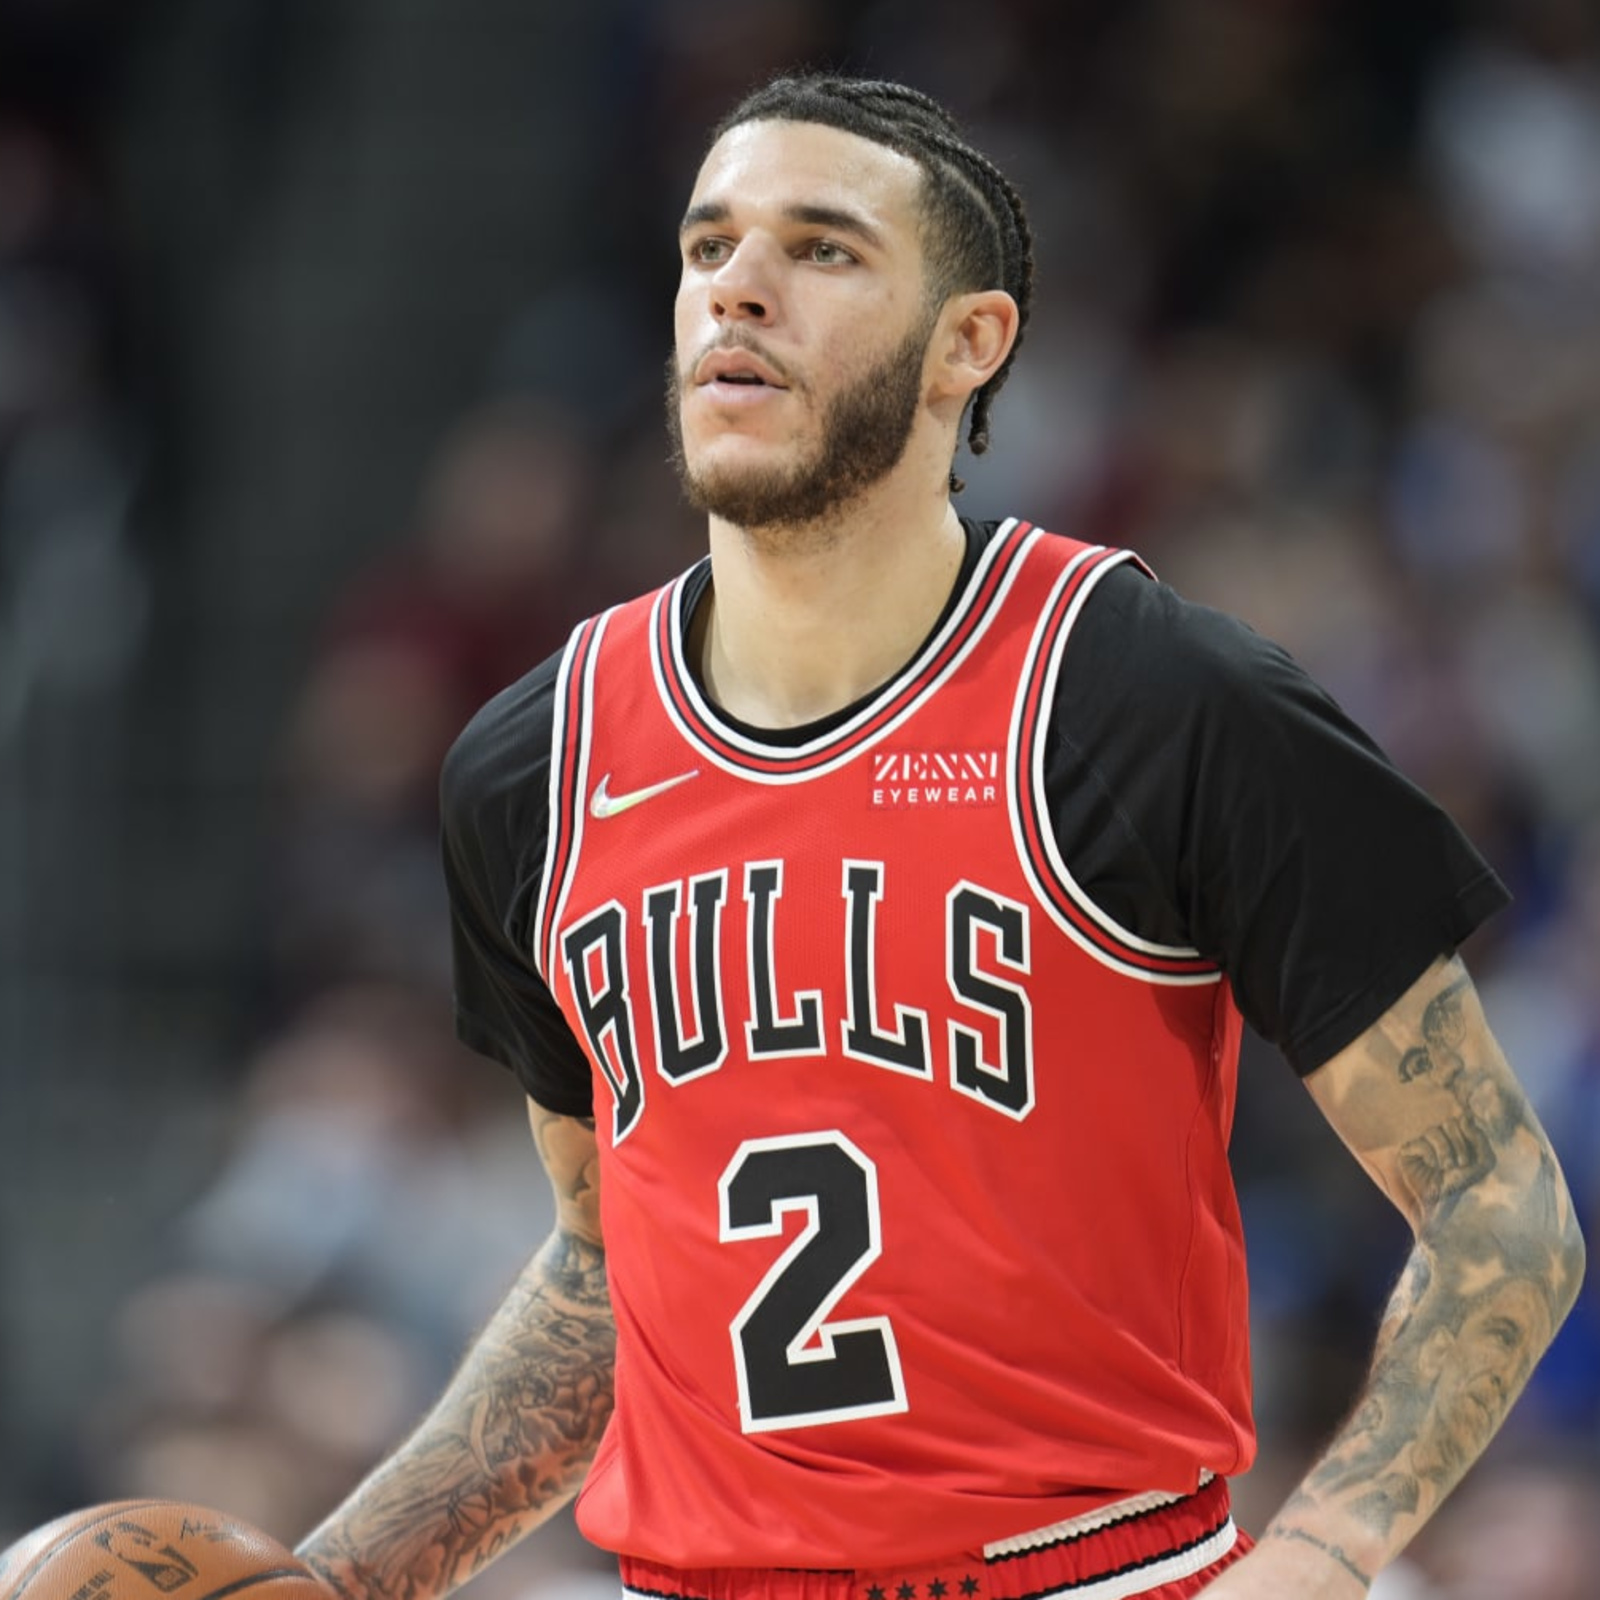 Bulls' Lonzo Ball Says He's 'Finally Seeing Some Improvement' in